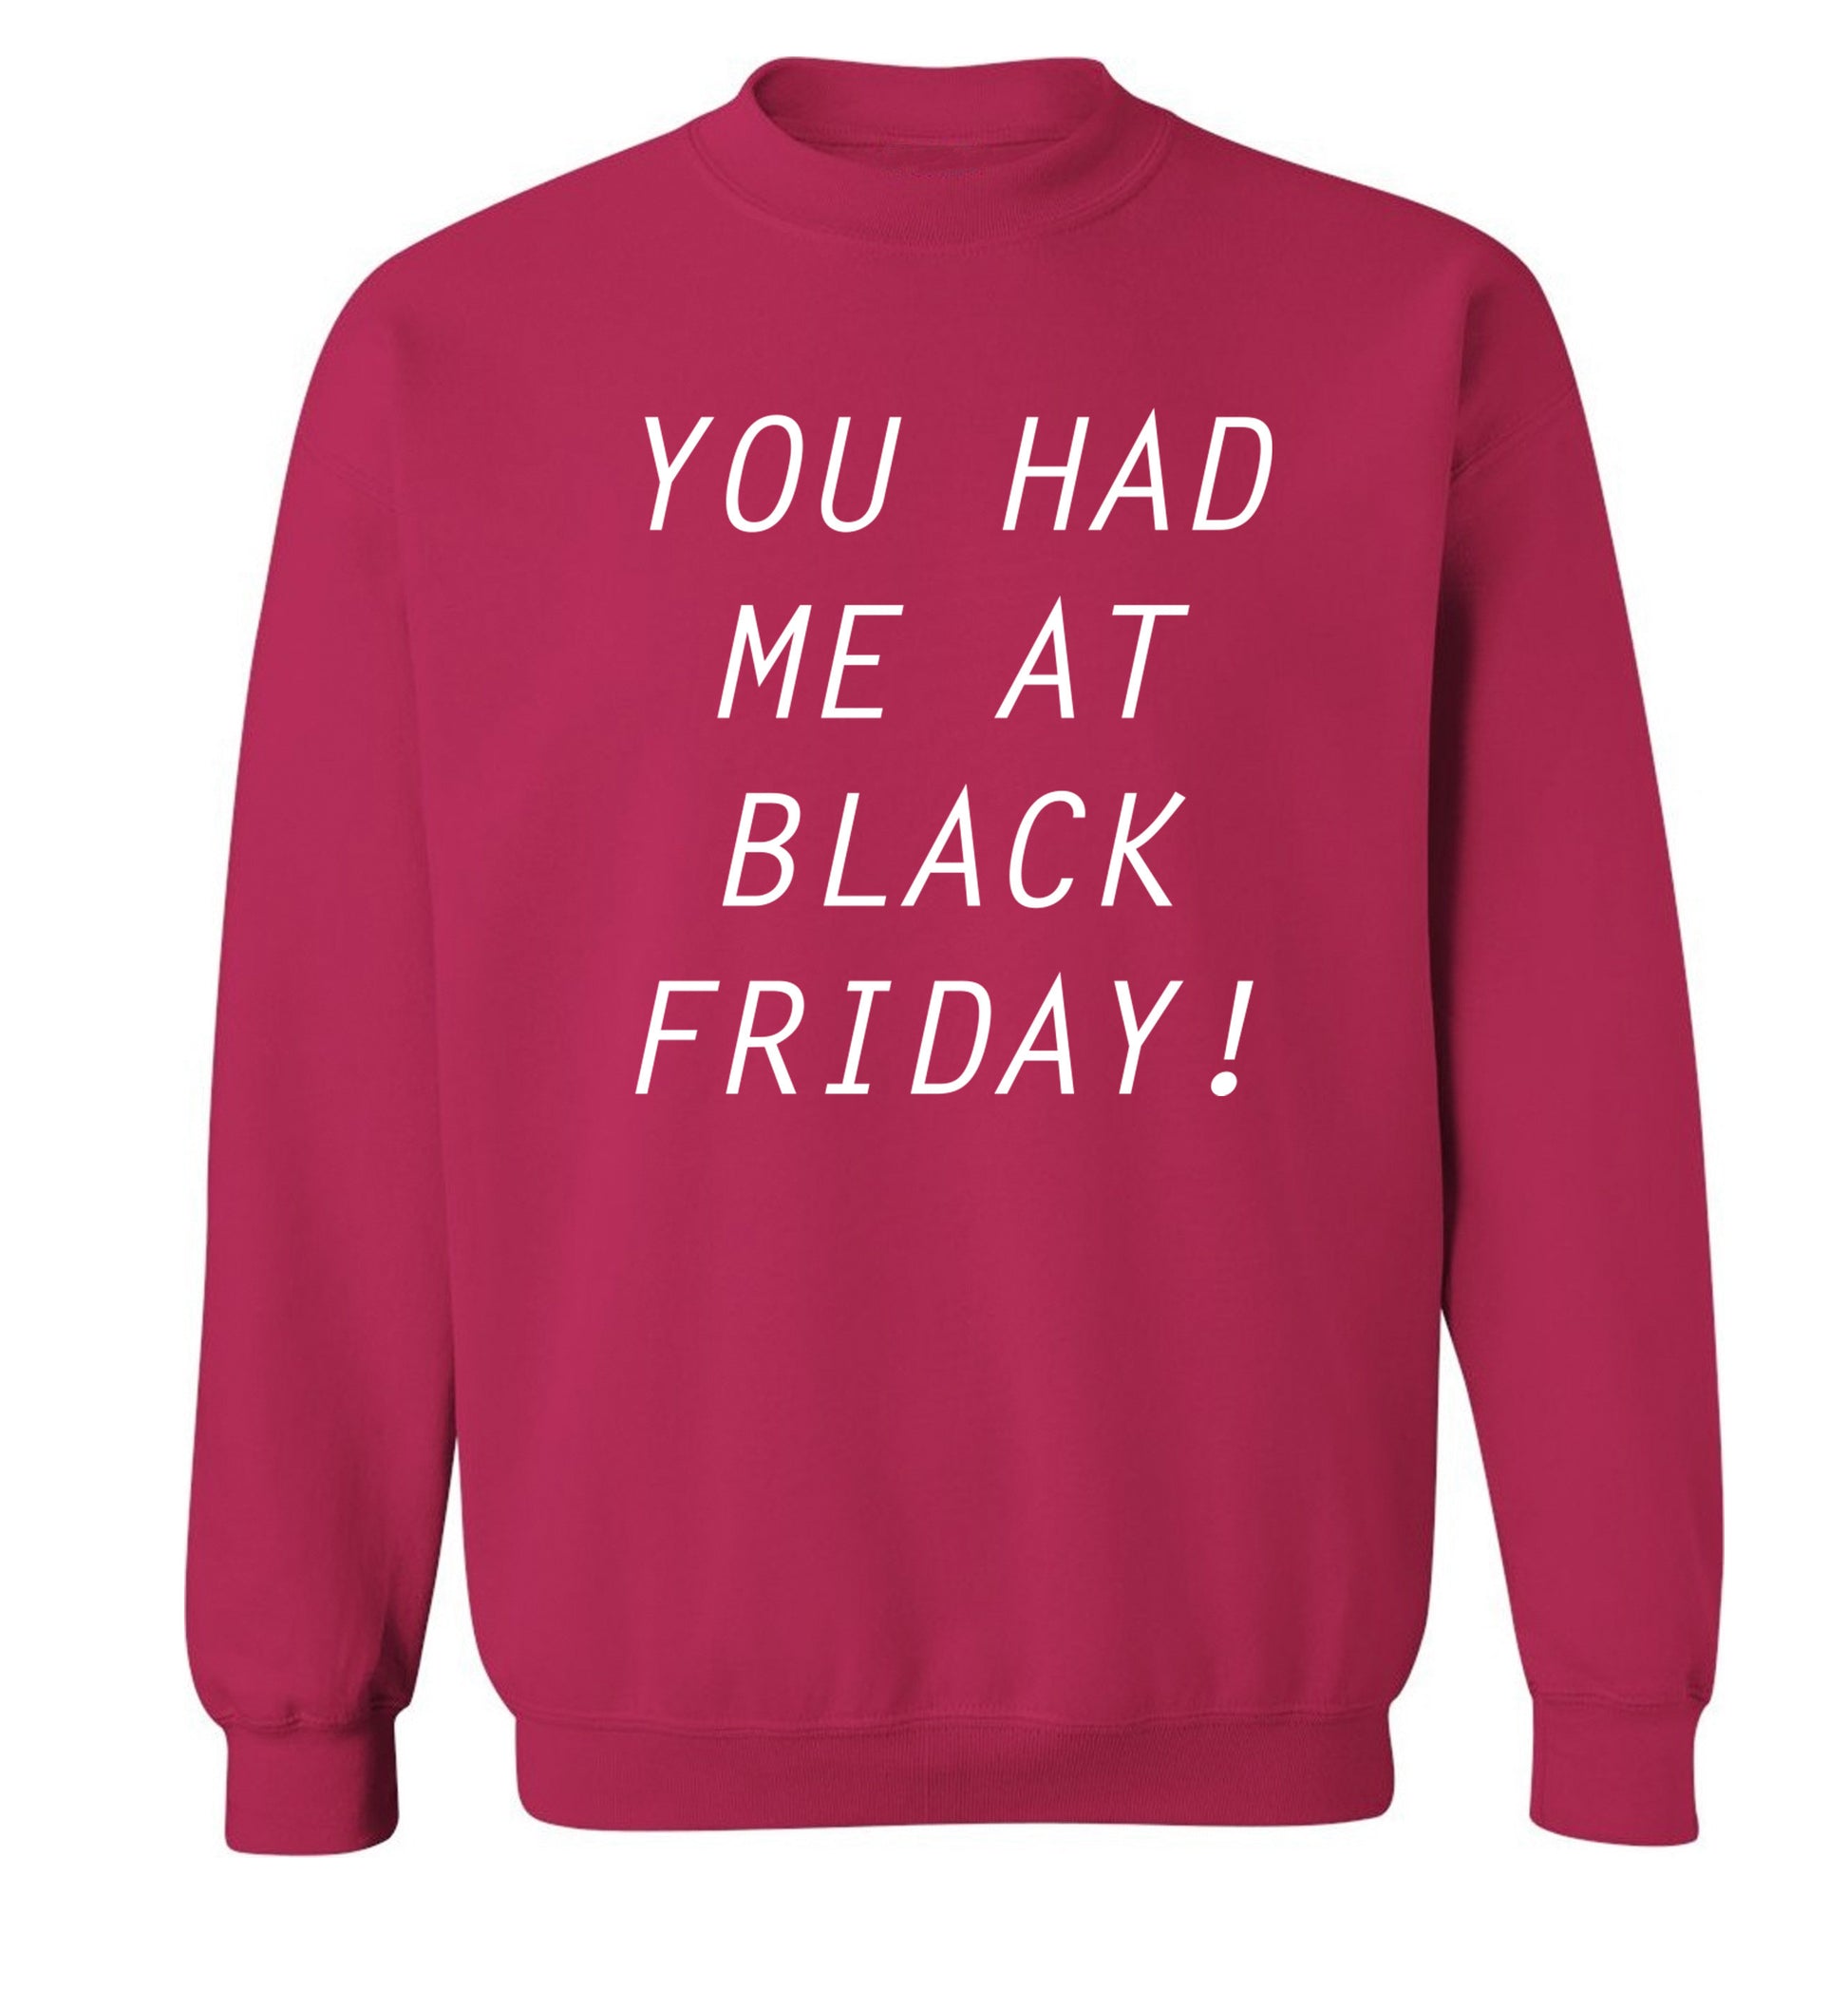 You had me at black friday Adult's unisex pink Sweater 2XL